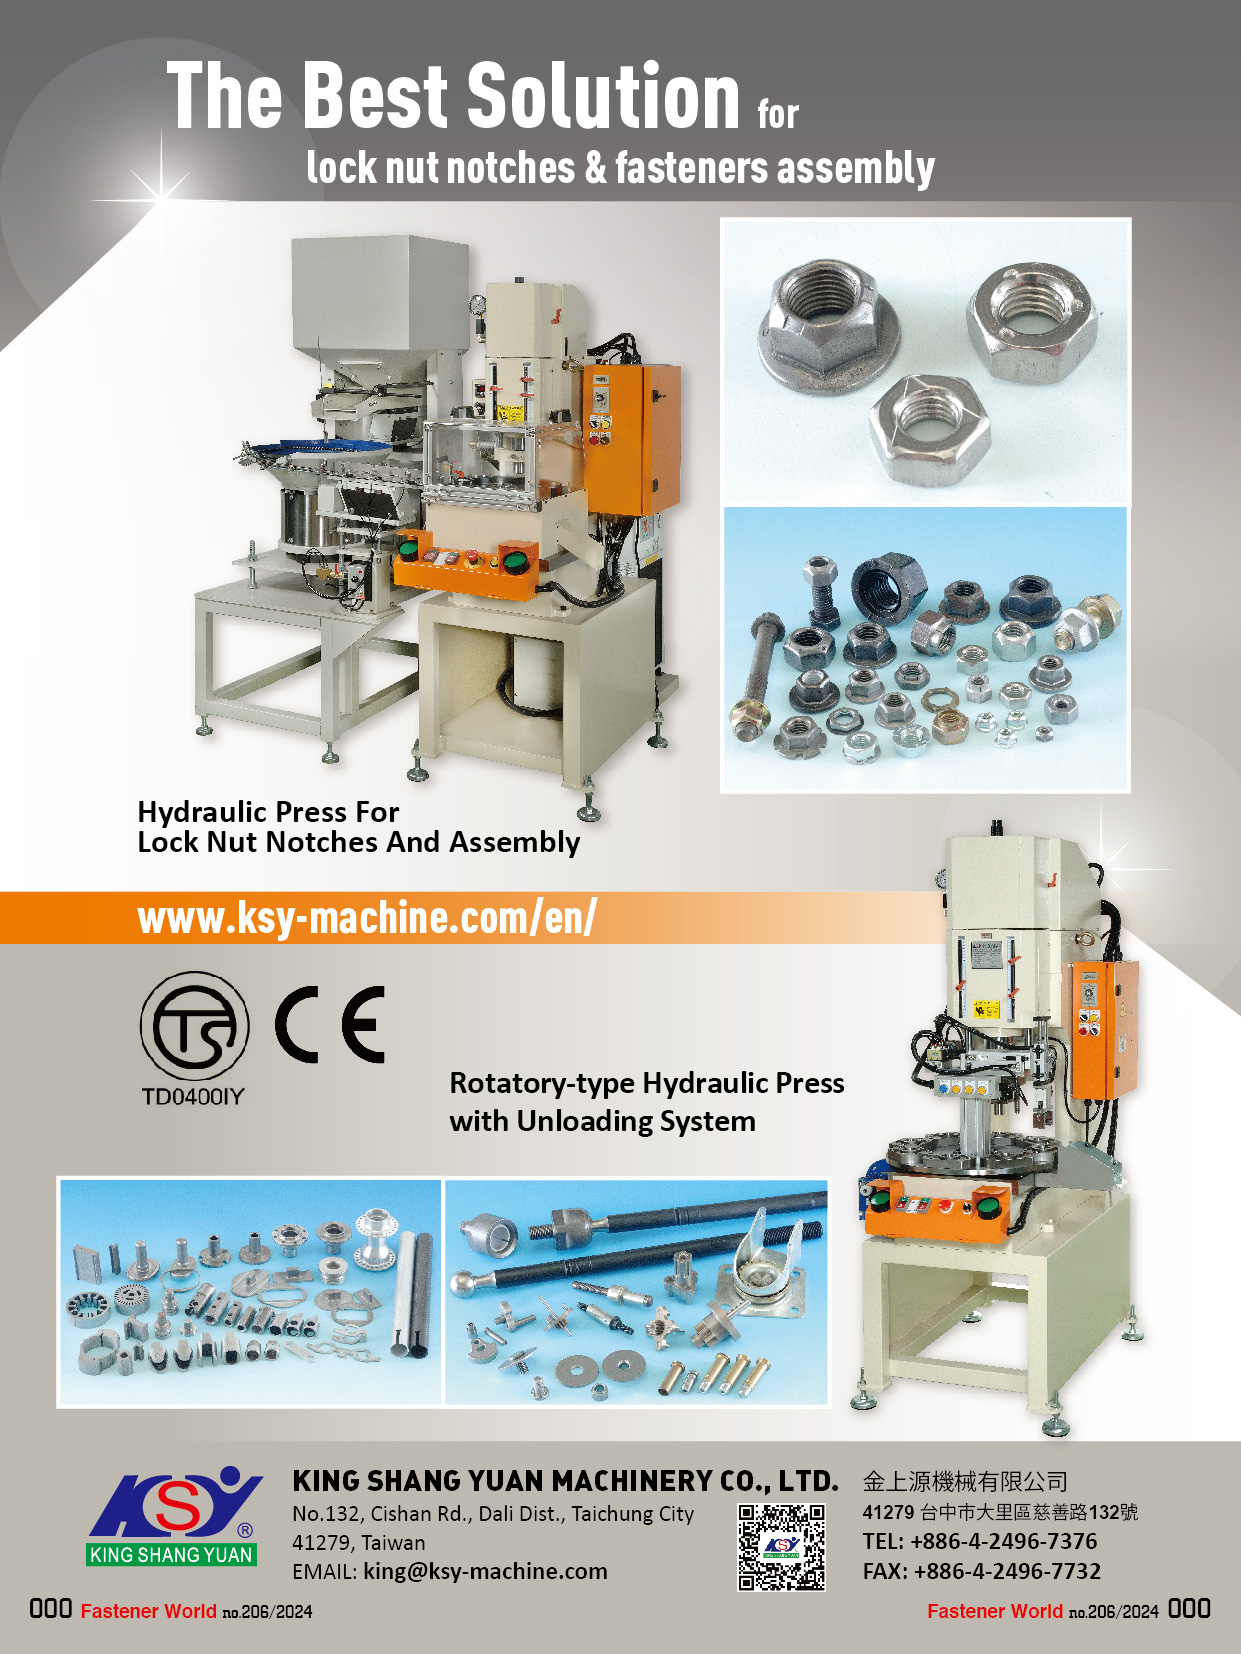 KING SHANG YUAN MACHINERY CO., LTD. , Lock Nut Notches & Fasteners Assembly, Rotatory-type Hydraulic Press with Unloading System